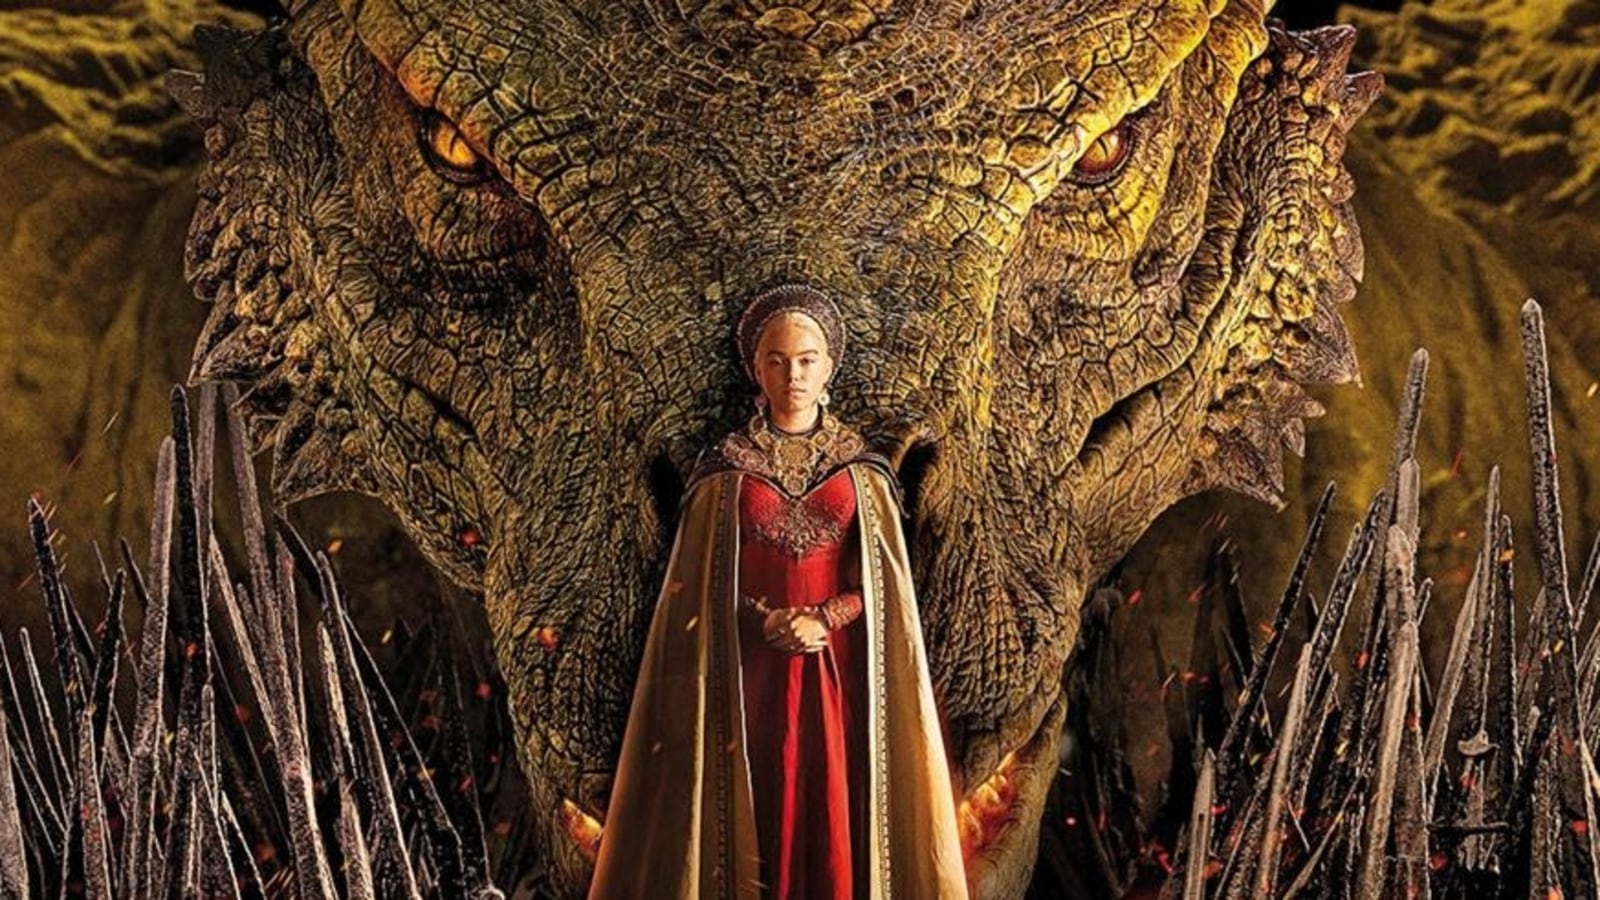 House of the Dragon' Will Be 'Succession' With Dragons, Says Showrunner -  CNET